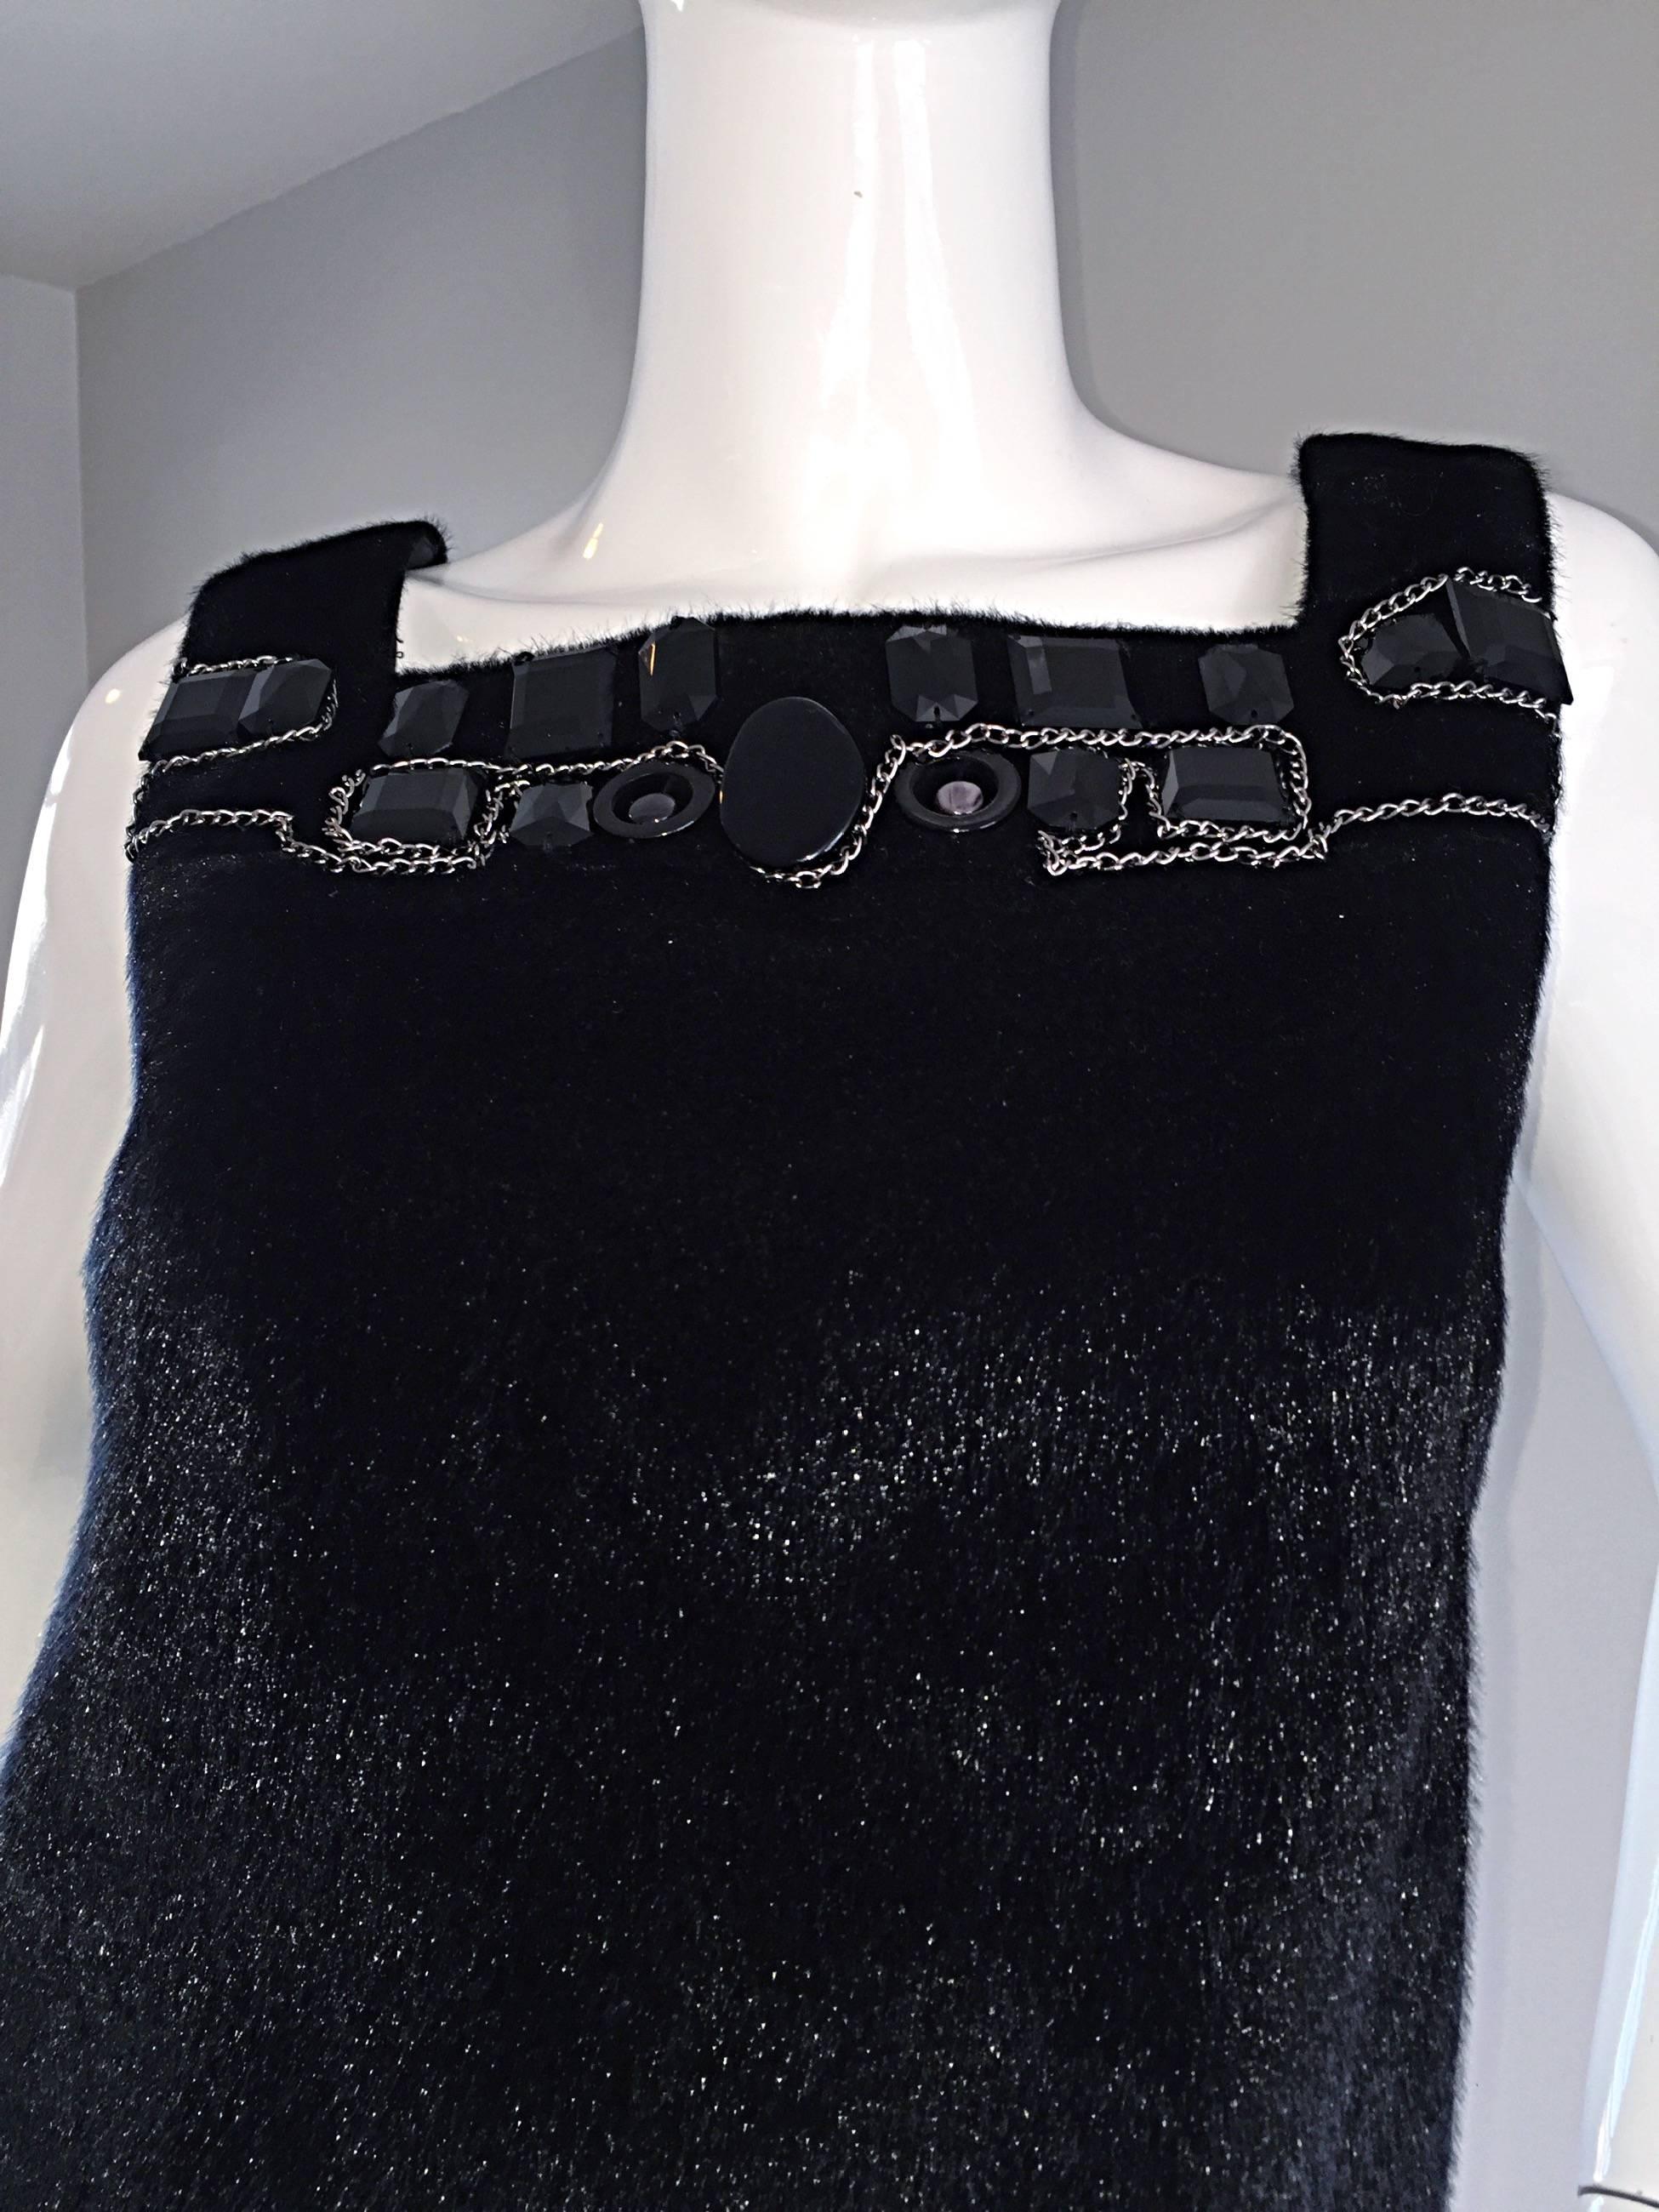 Women's 1990s 90s Faux Fur Designer Black Shift Dress w/ Chains and Beads Made in Italy For Sale